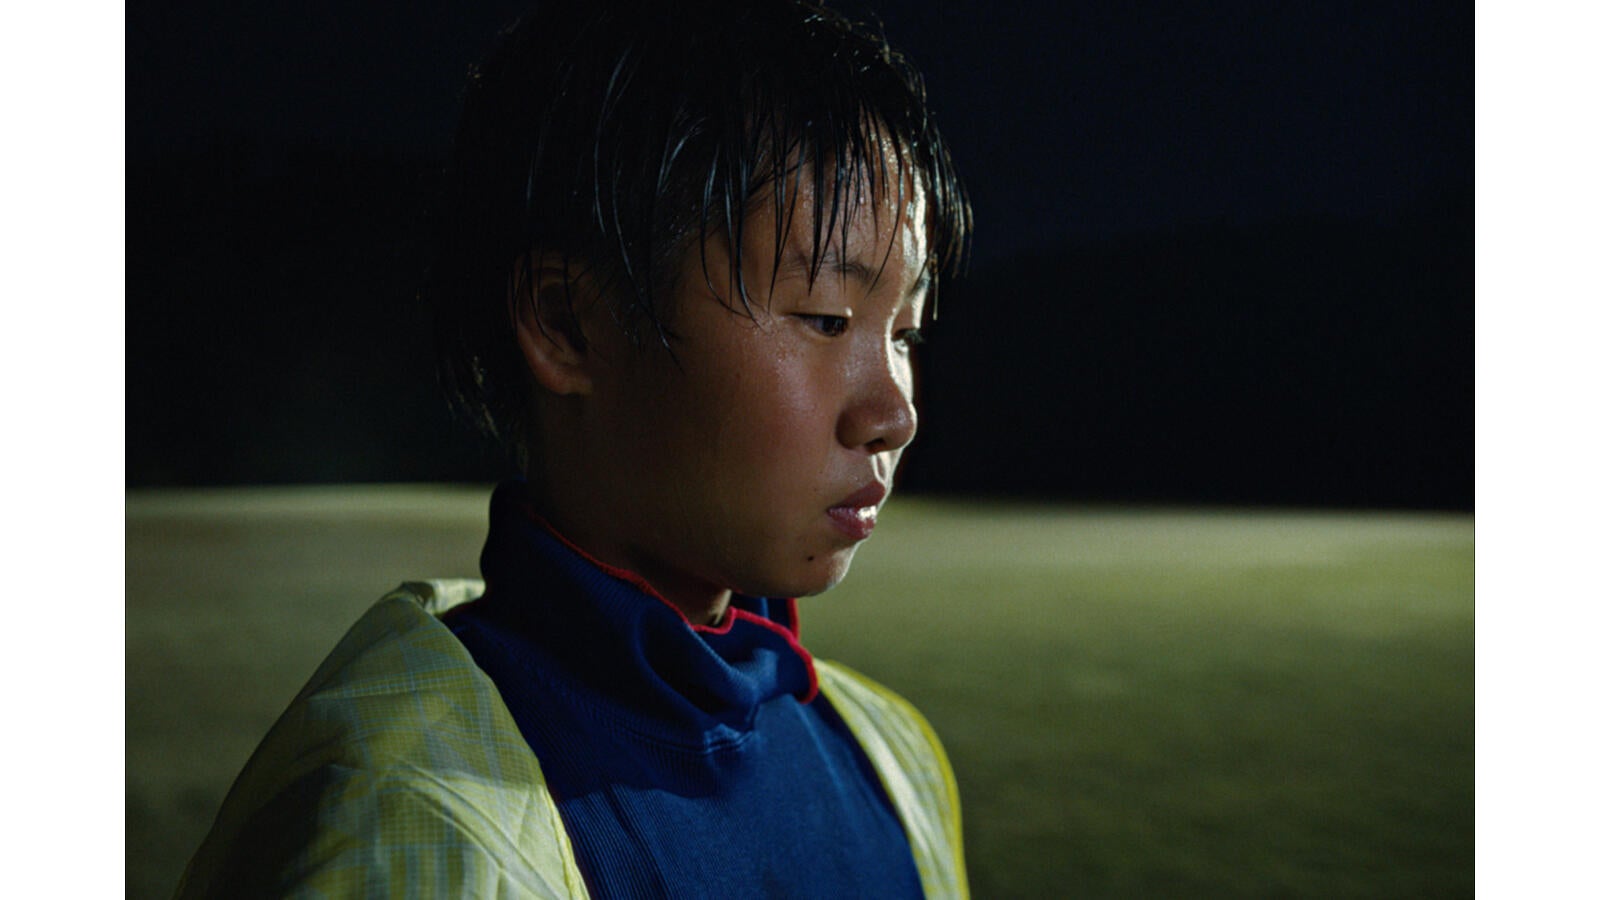 Shot On Venice Nike Japan You Can T Stop The Future Sony Cine